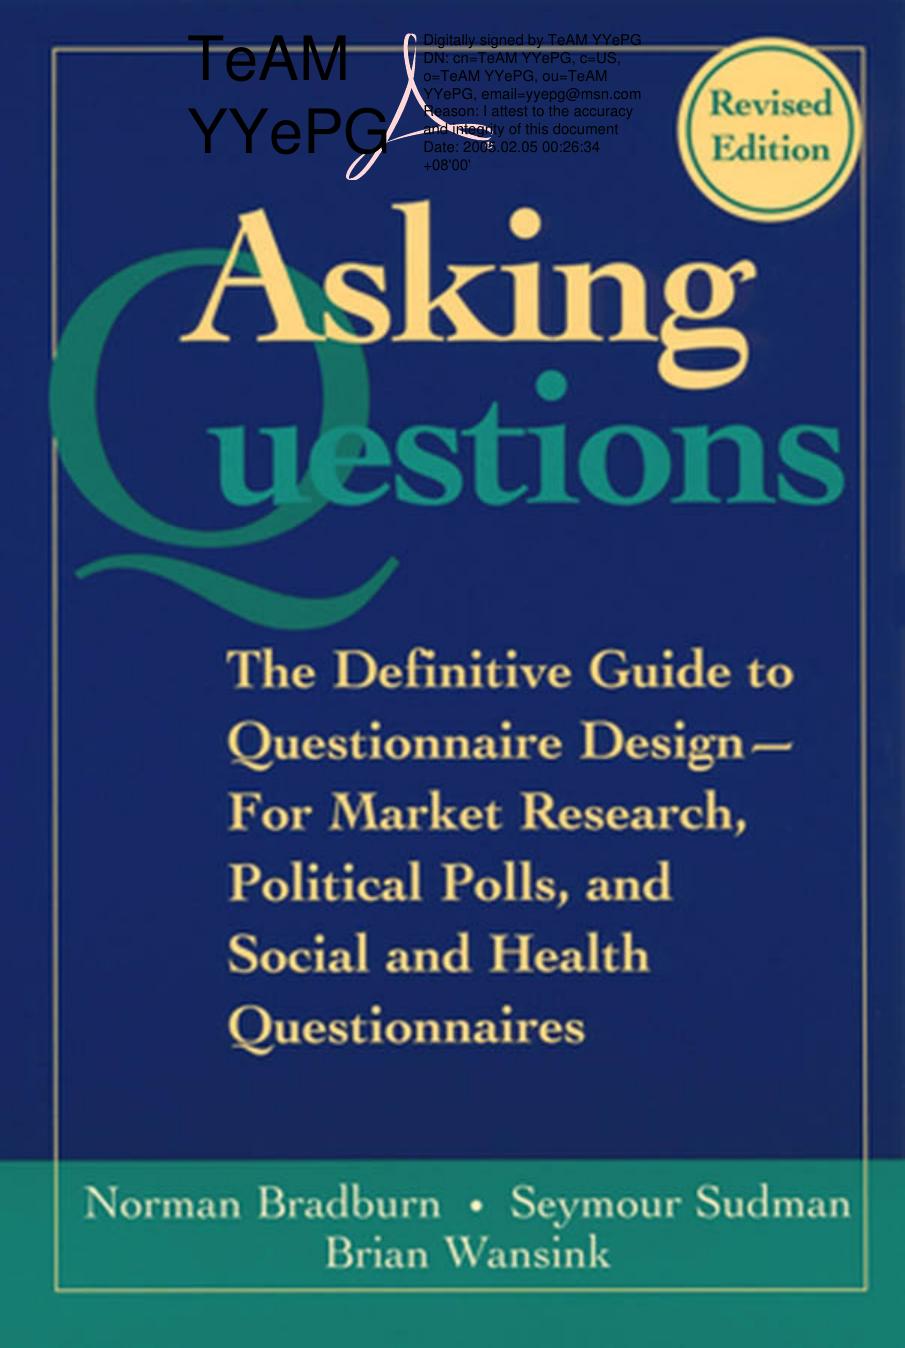 Asking Questions  The Definitive Guide to Questionnaire Design -- 2004